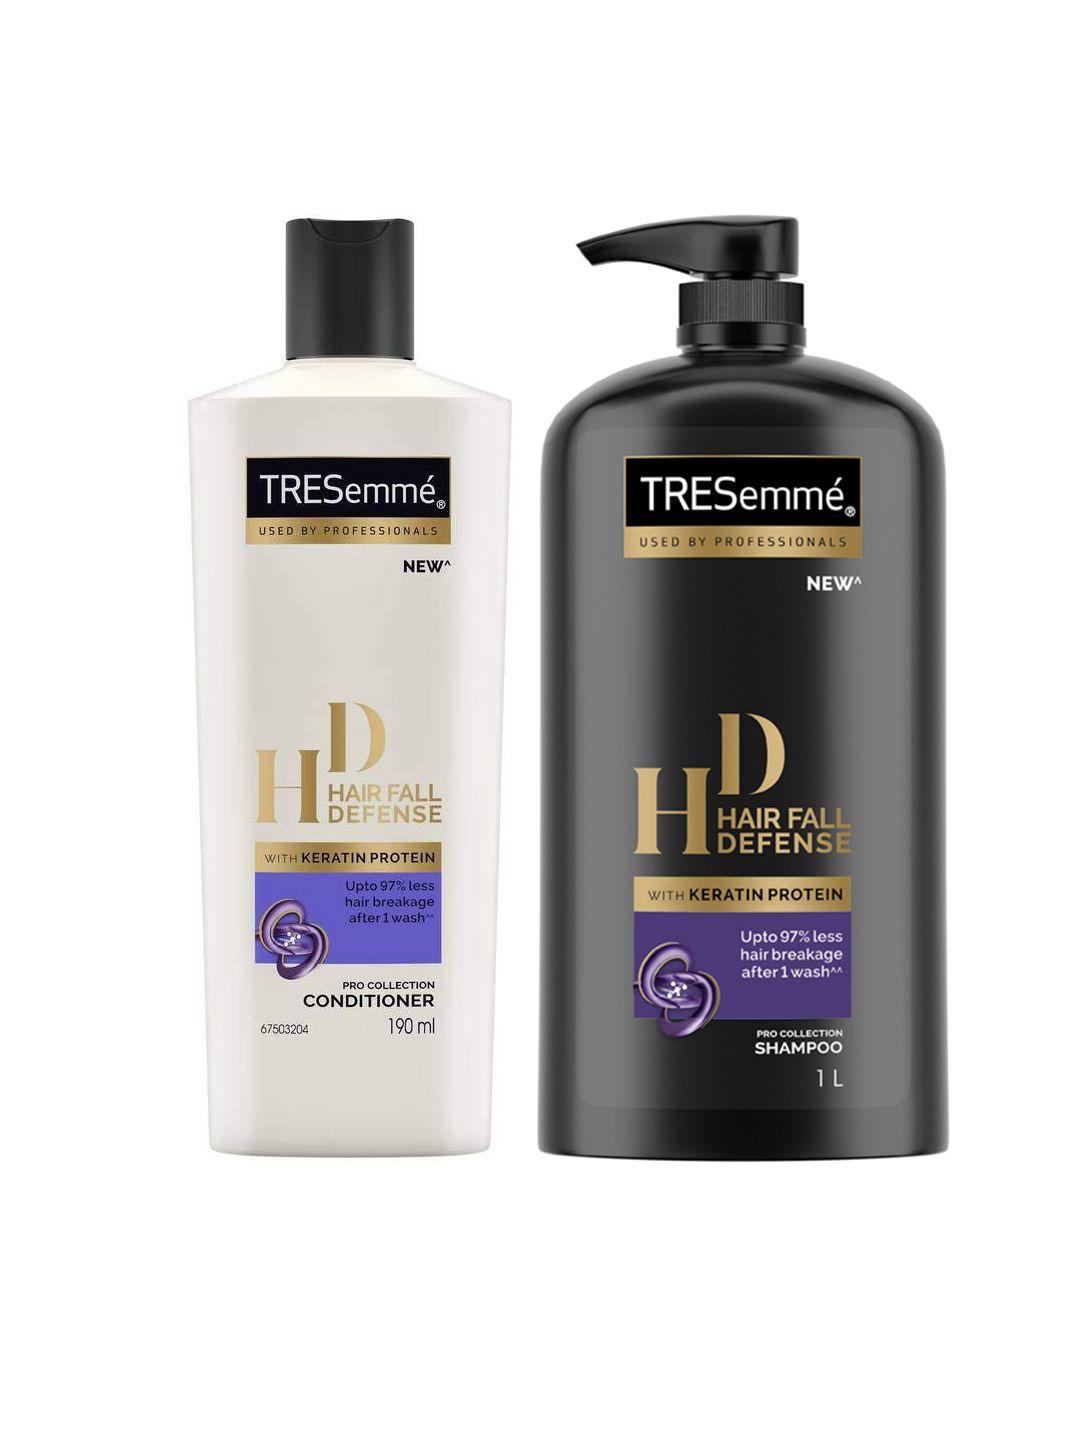 tresemme set of hair fall defense pro collection shampoo & conditioner